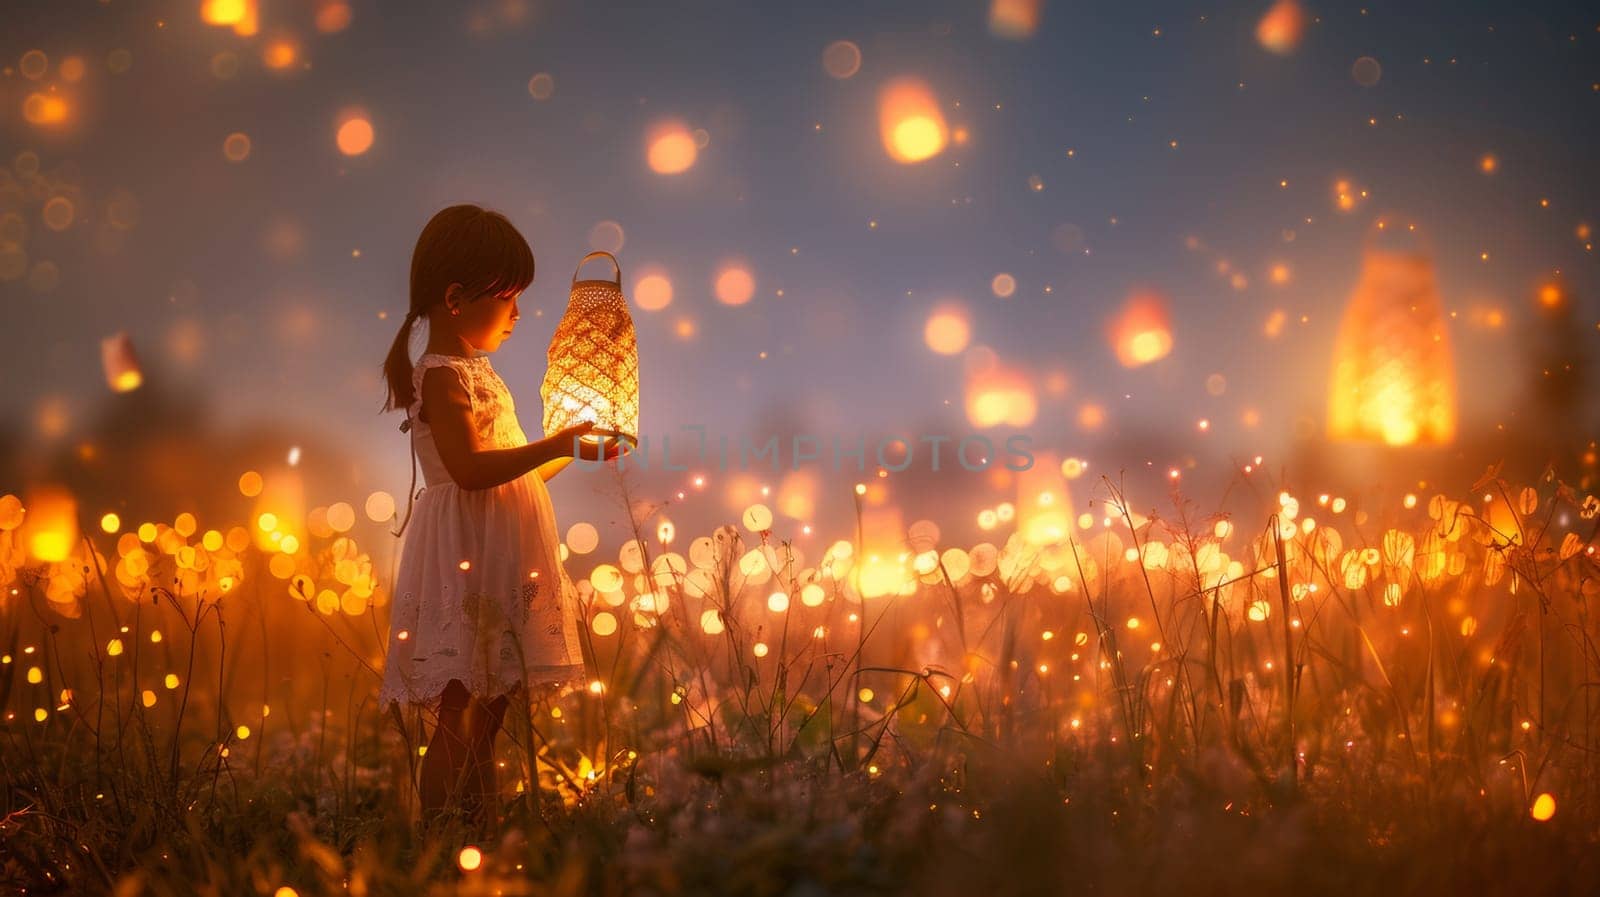 A little girl holding a lantern in the middle of grass, AI by starush